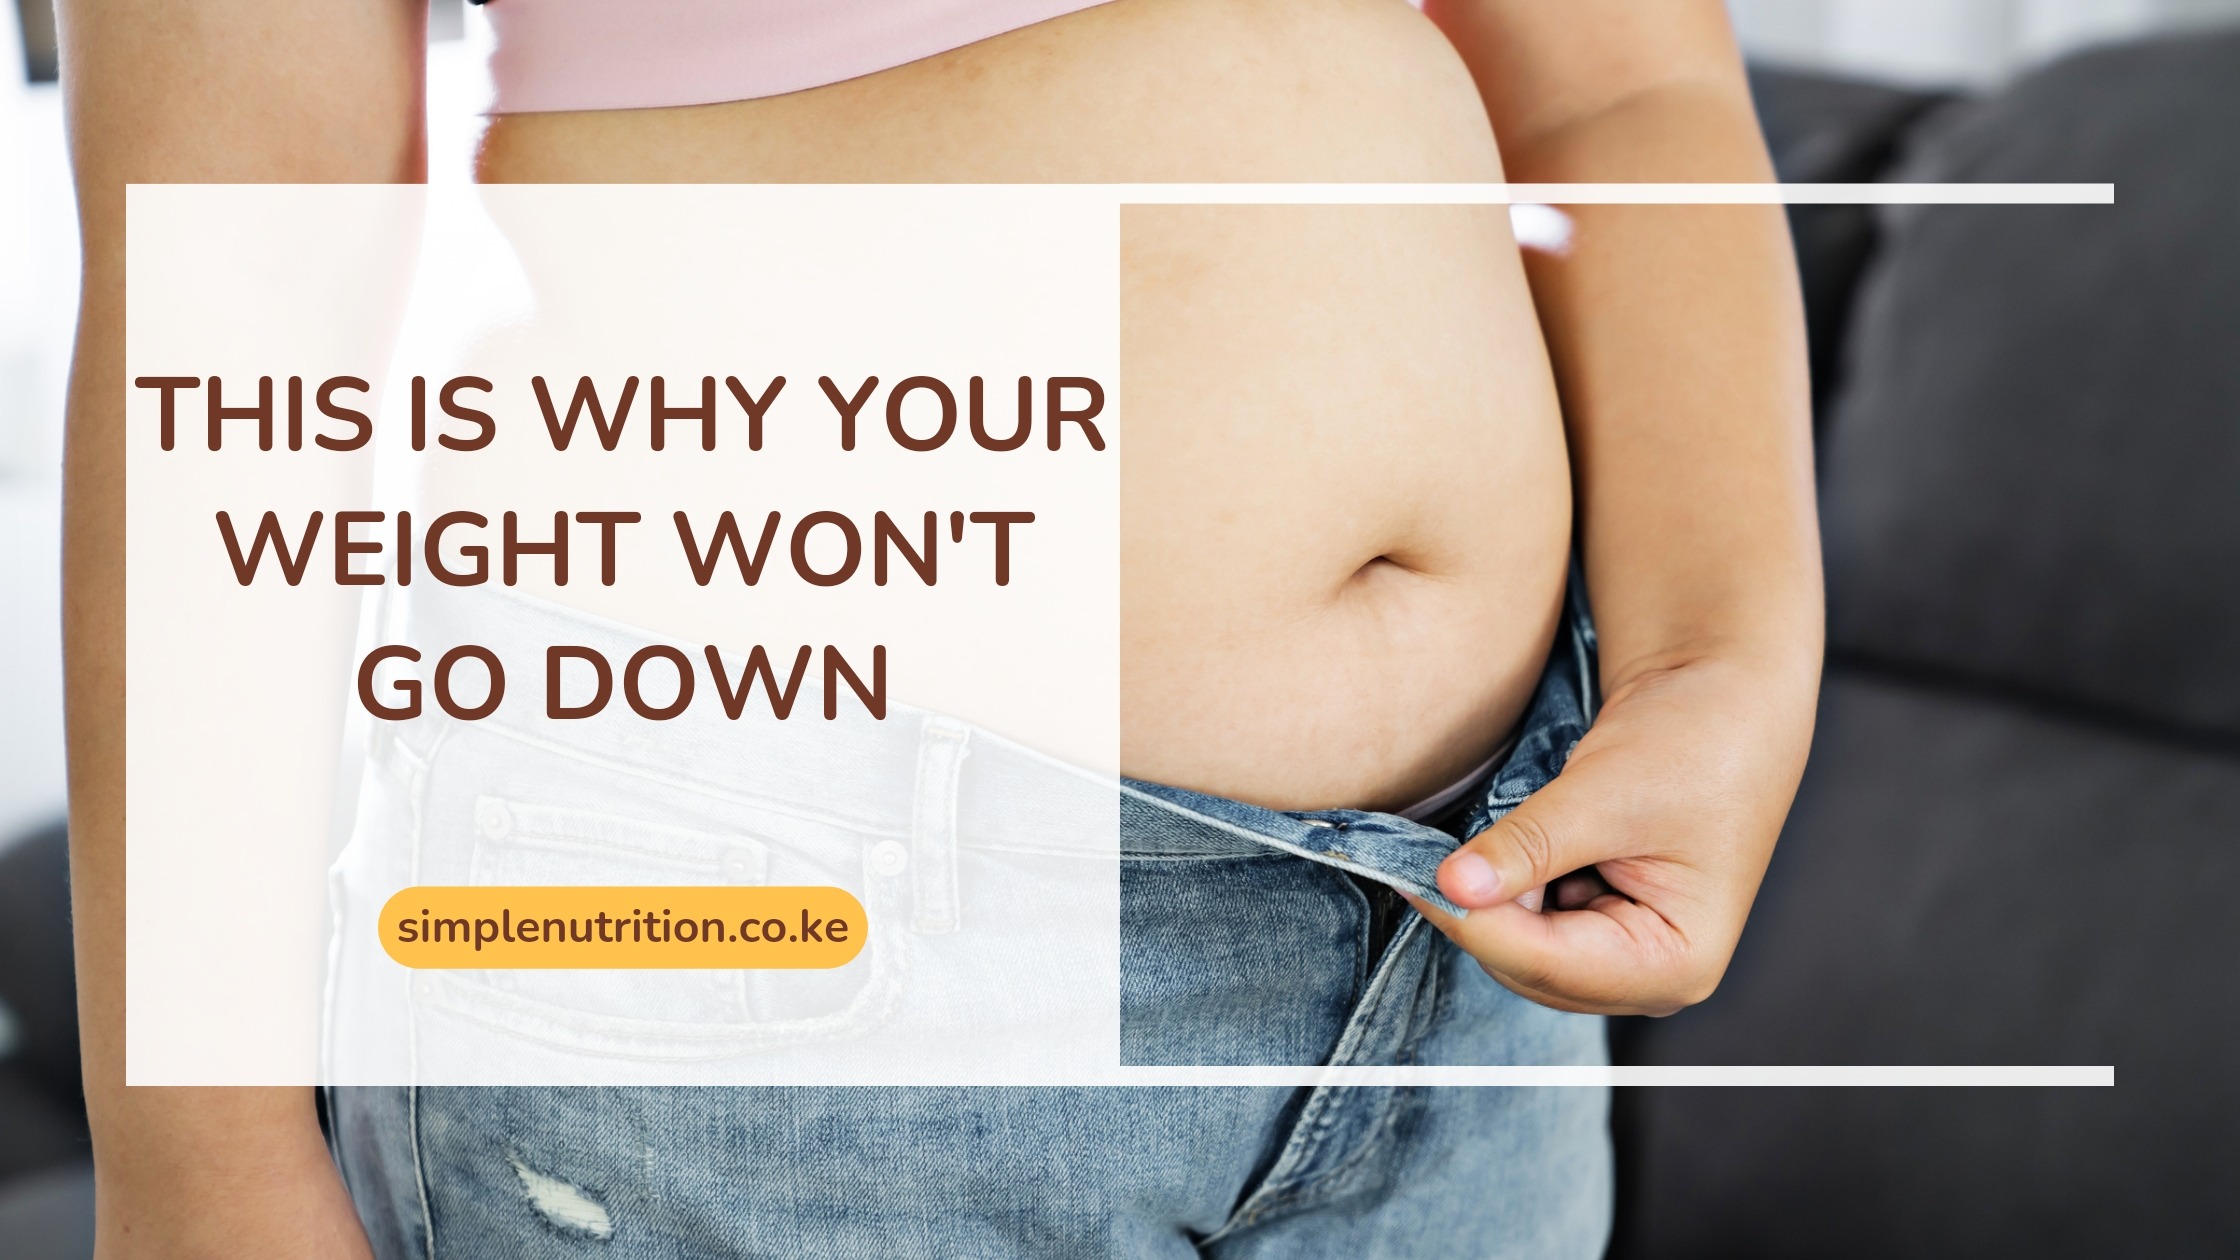 This is Why Your Weight Won’t Go Down